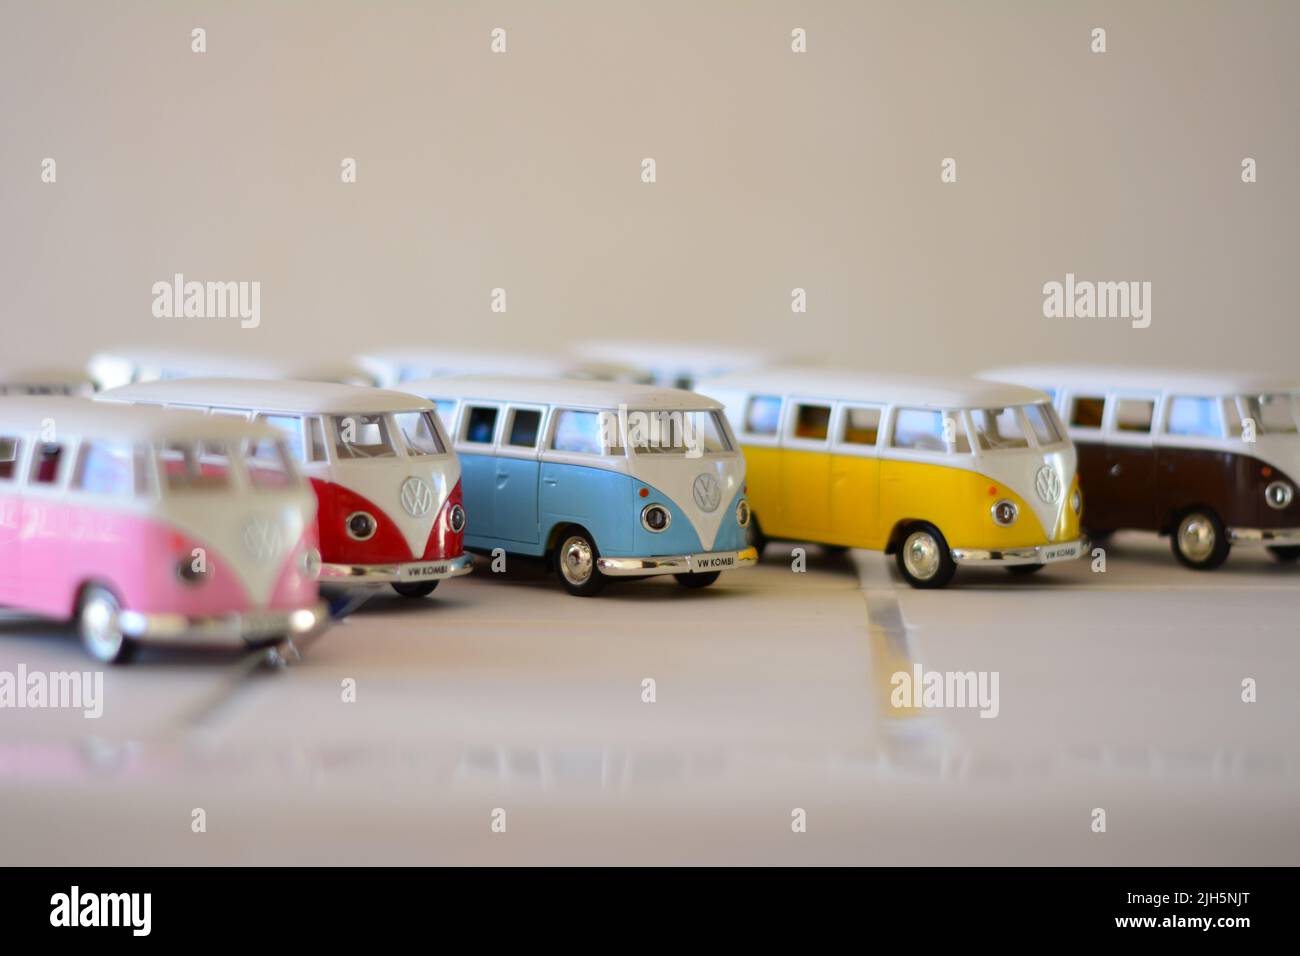 Iron miniature, Diecast, van in various colors, Brazil, South America, side view, selective focus, white background, intentionally cropped, intentiona Stock Photo